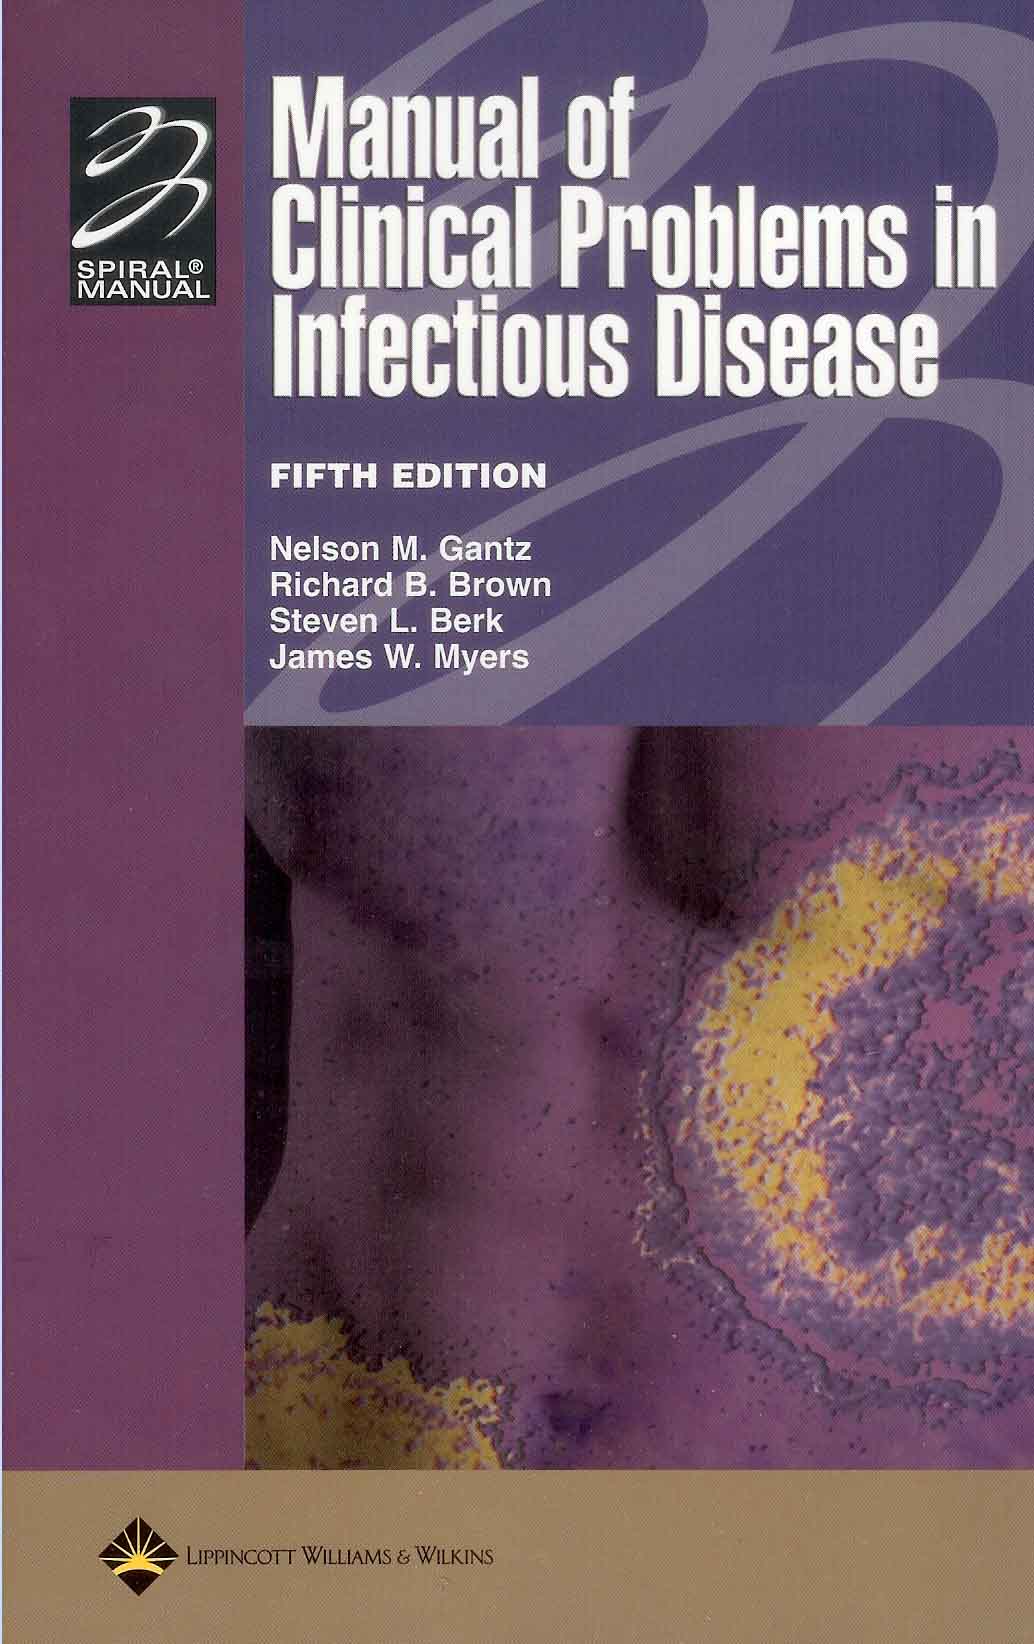 Manual of Clinical Problems in Infectious Disease-5판